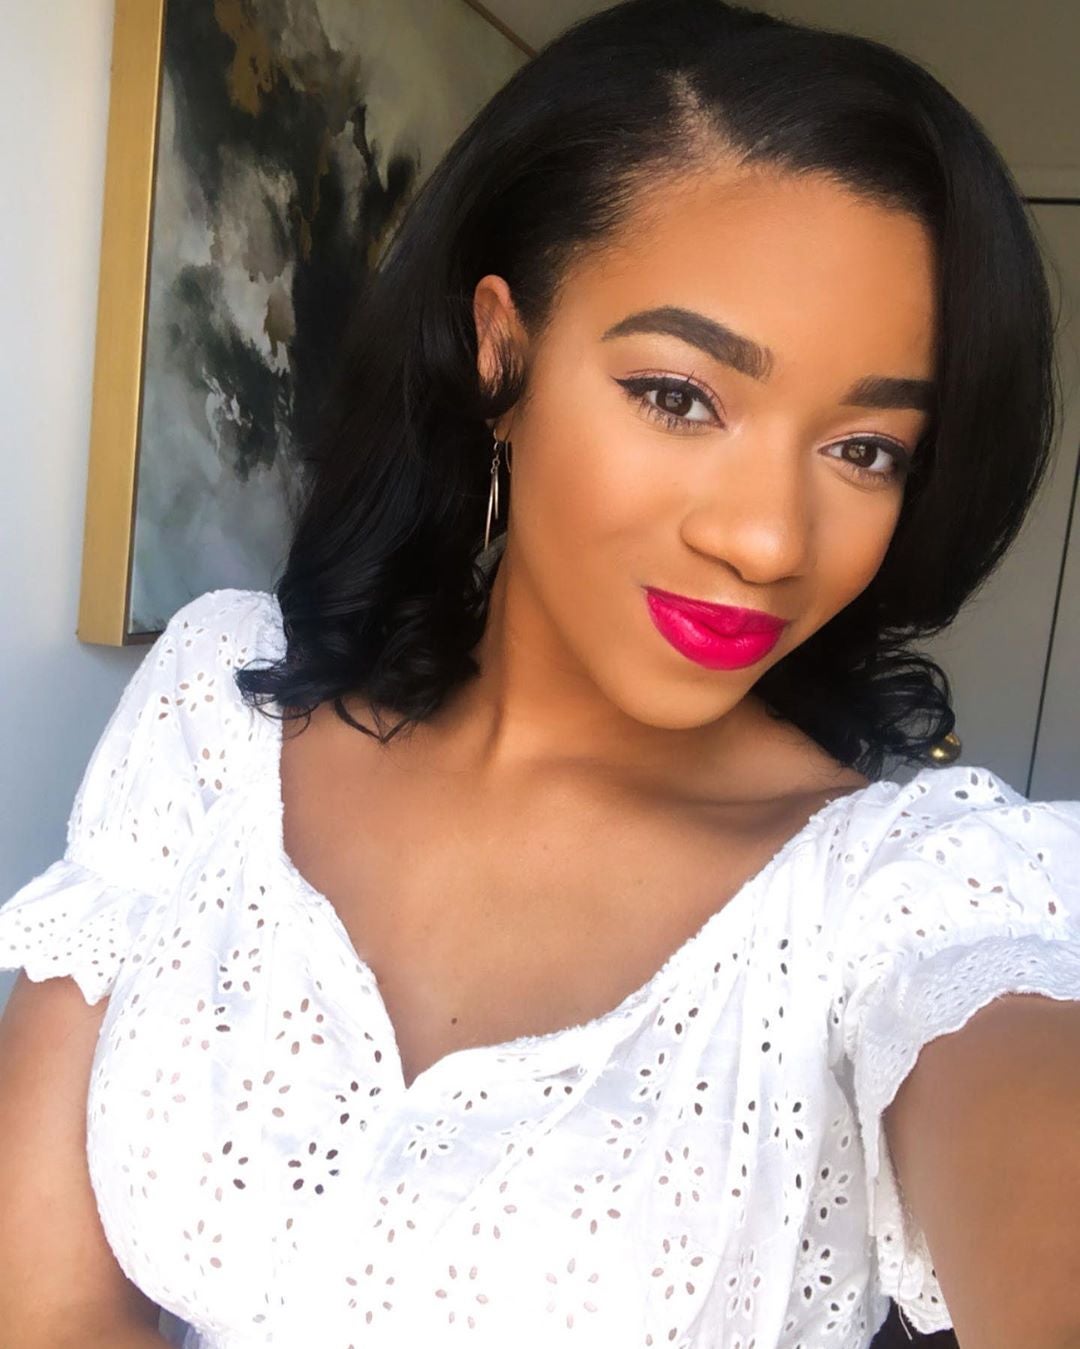 Forbløffe Nævne Forbedre 20 Beauties Who Prove That Black Women Make Any Lip Color Look Great |  Essence